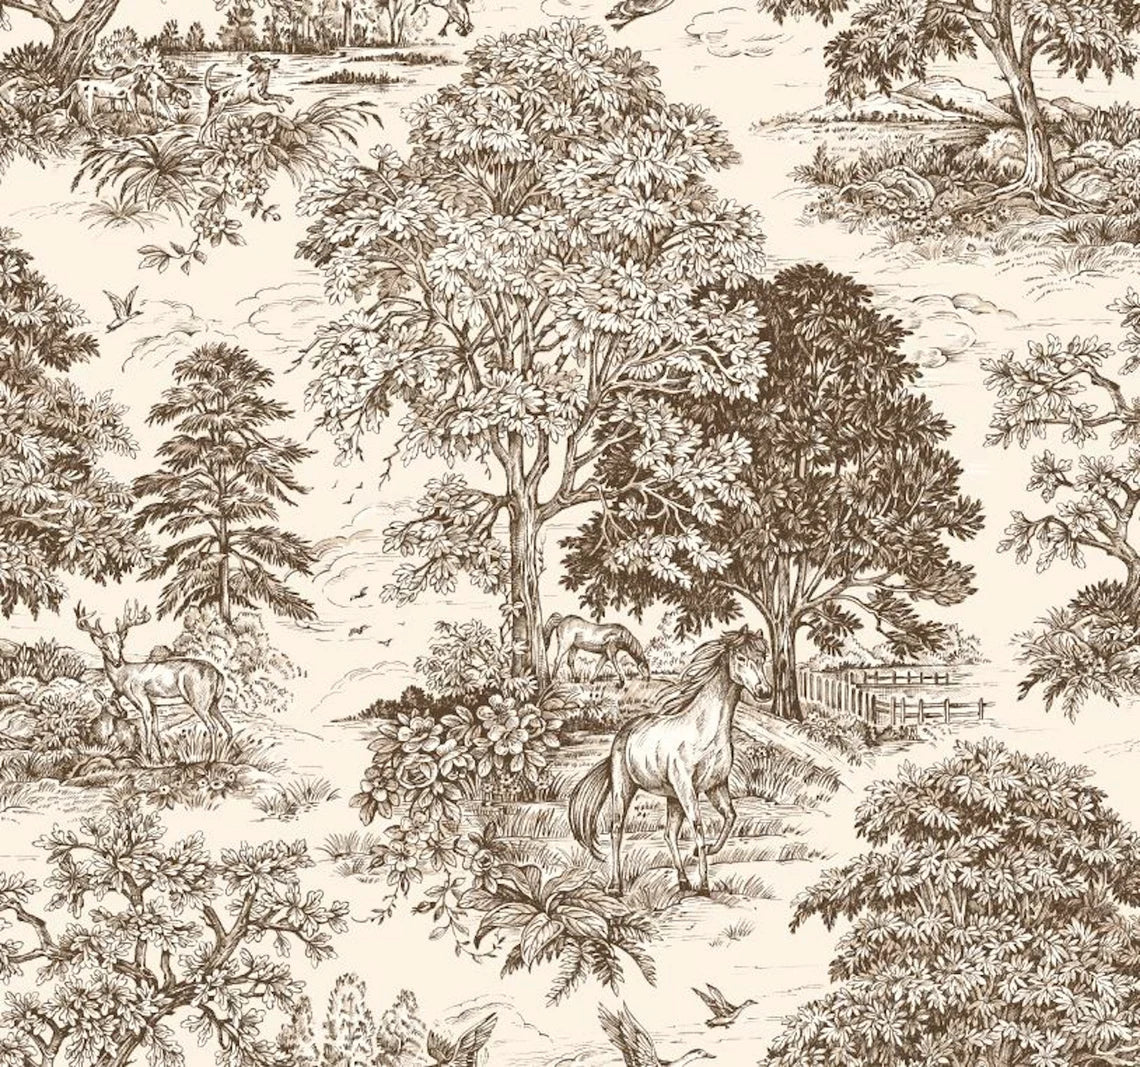 tailored tier cafe curtain panels pair in Yellowstone Driftwood Brown Country Toile- Horses, Deer, Dogs- Large Scale